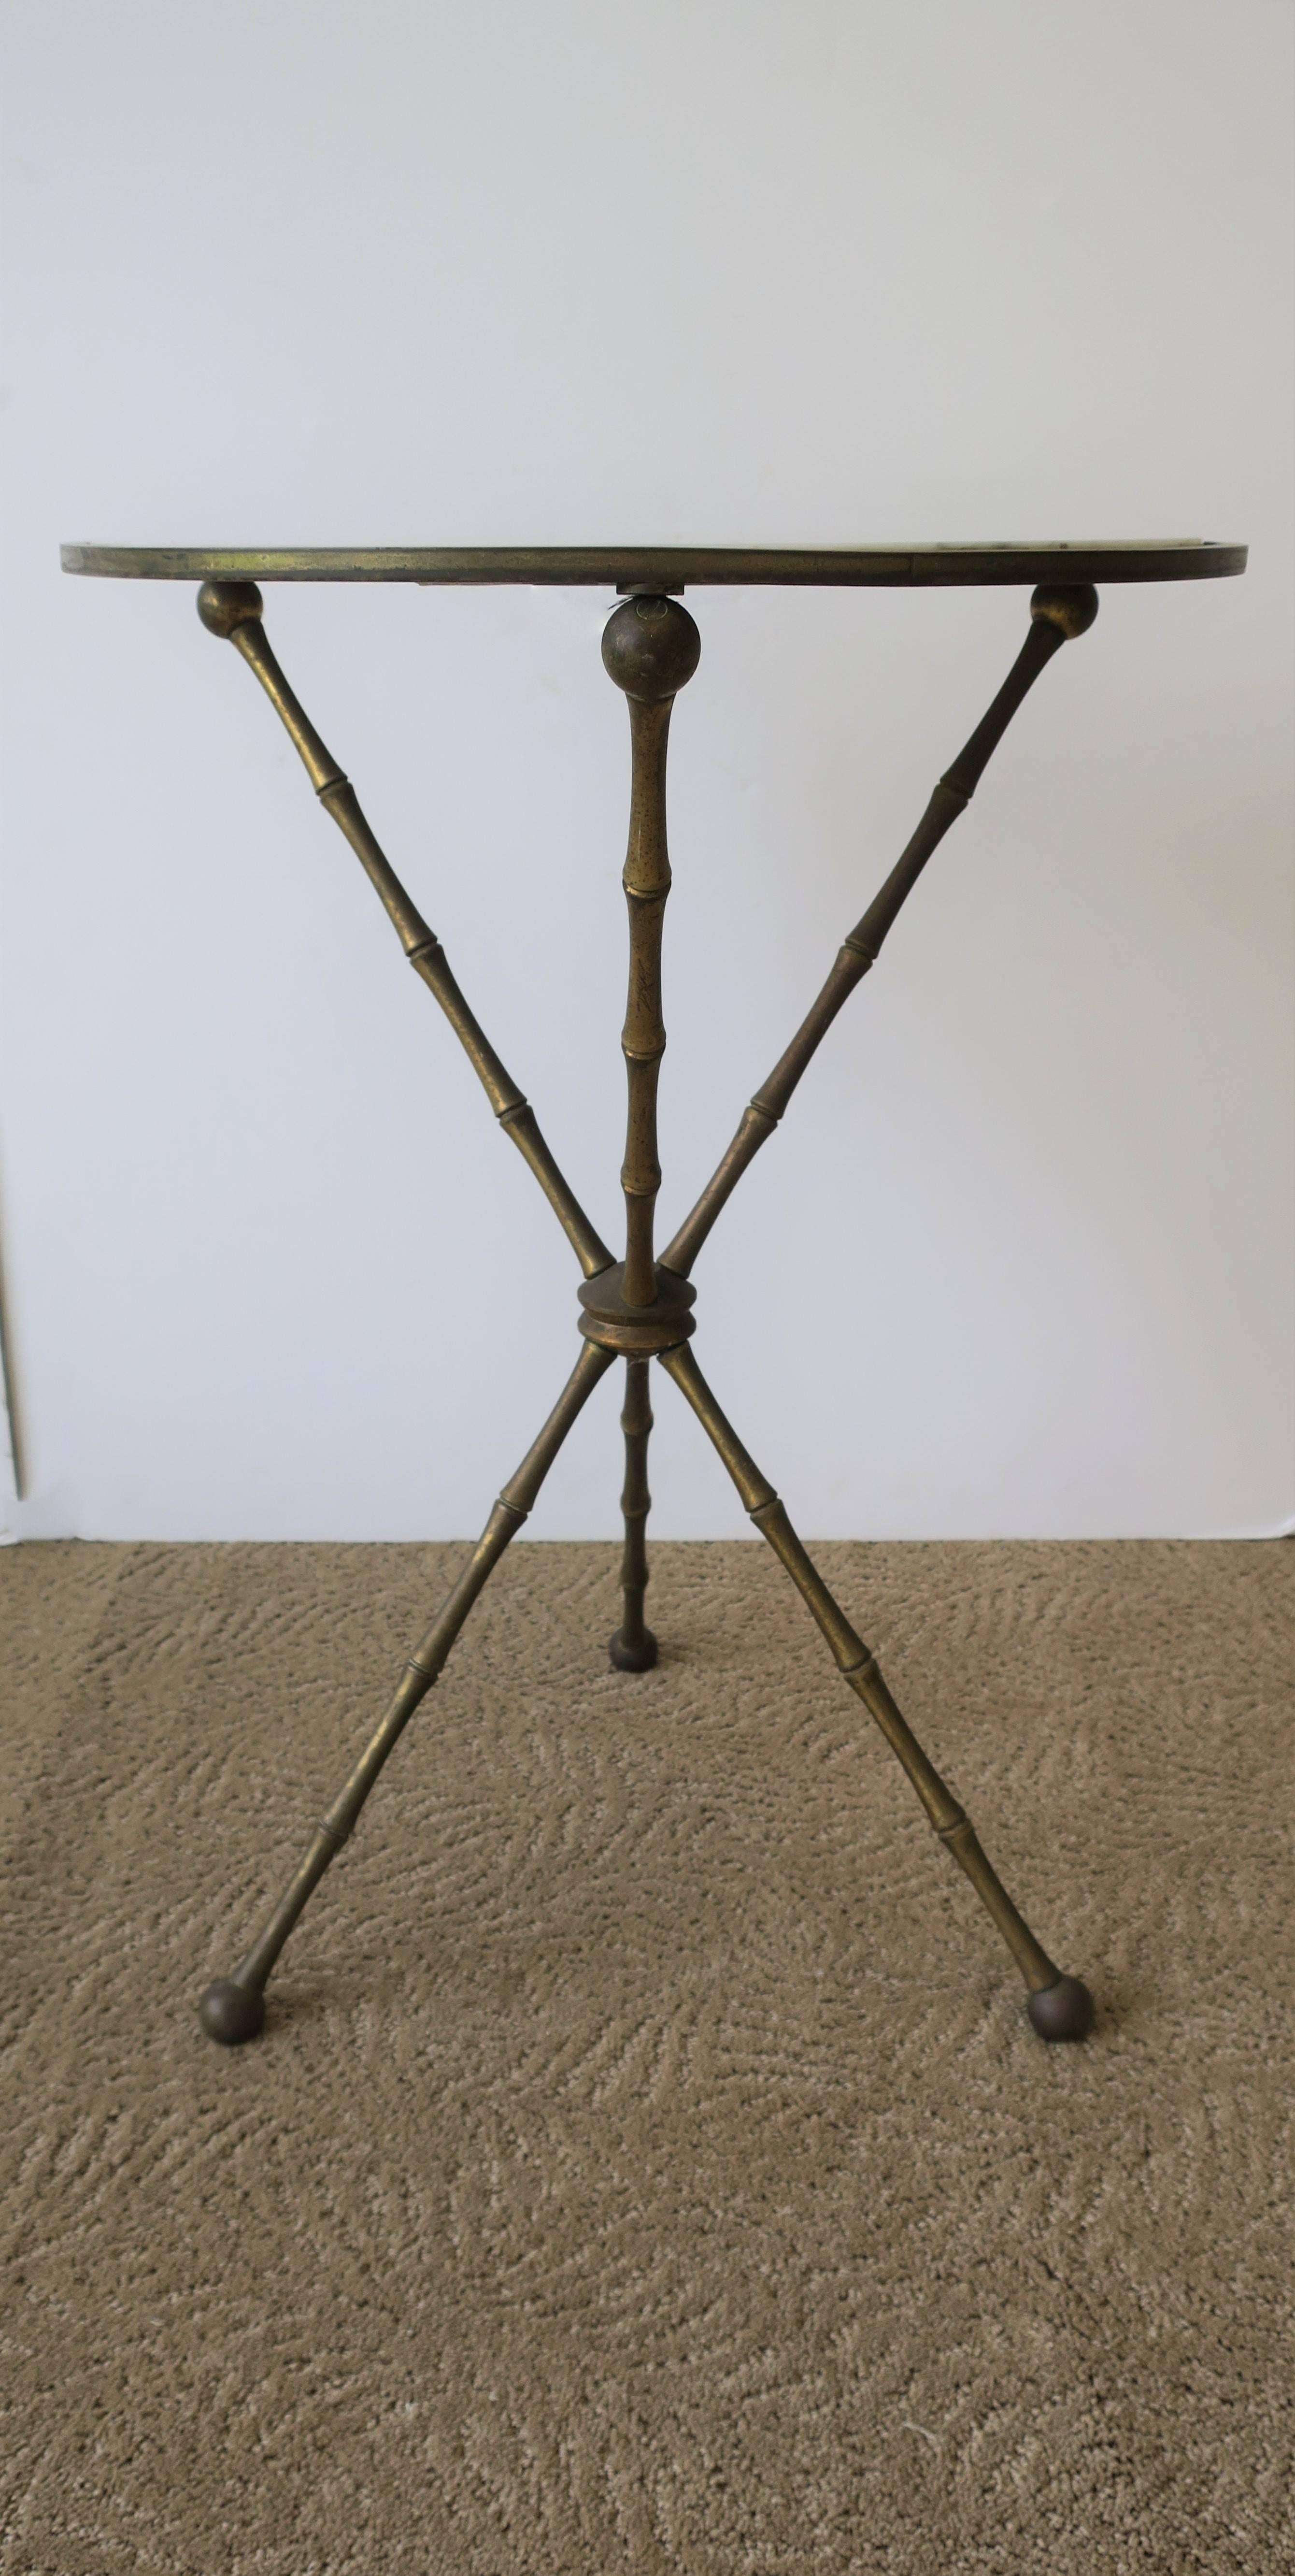 Neoclassical Midcentury Italian Marble and Brass Tripod Side Table, Italy, 1960s